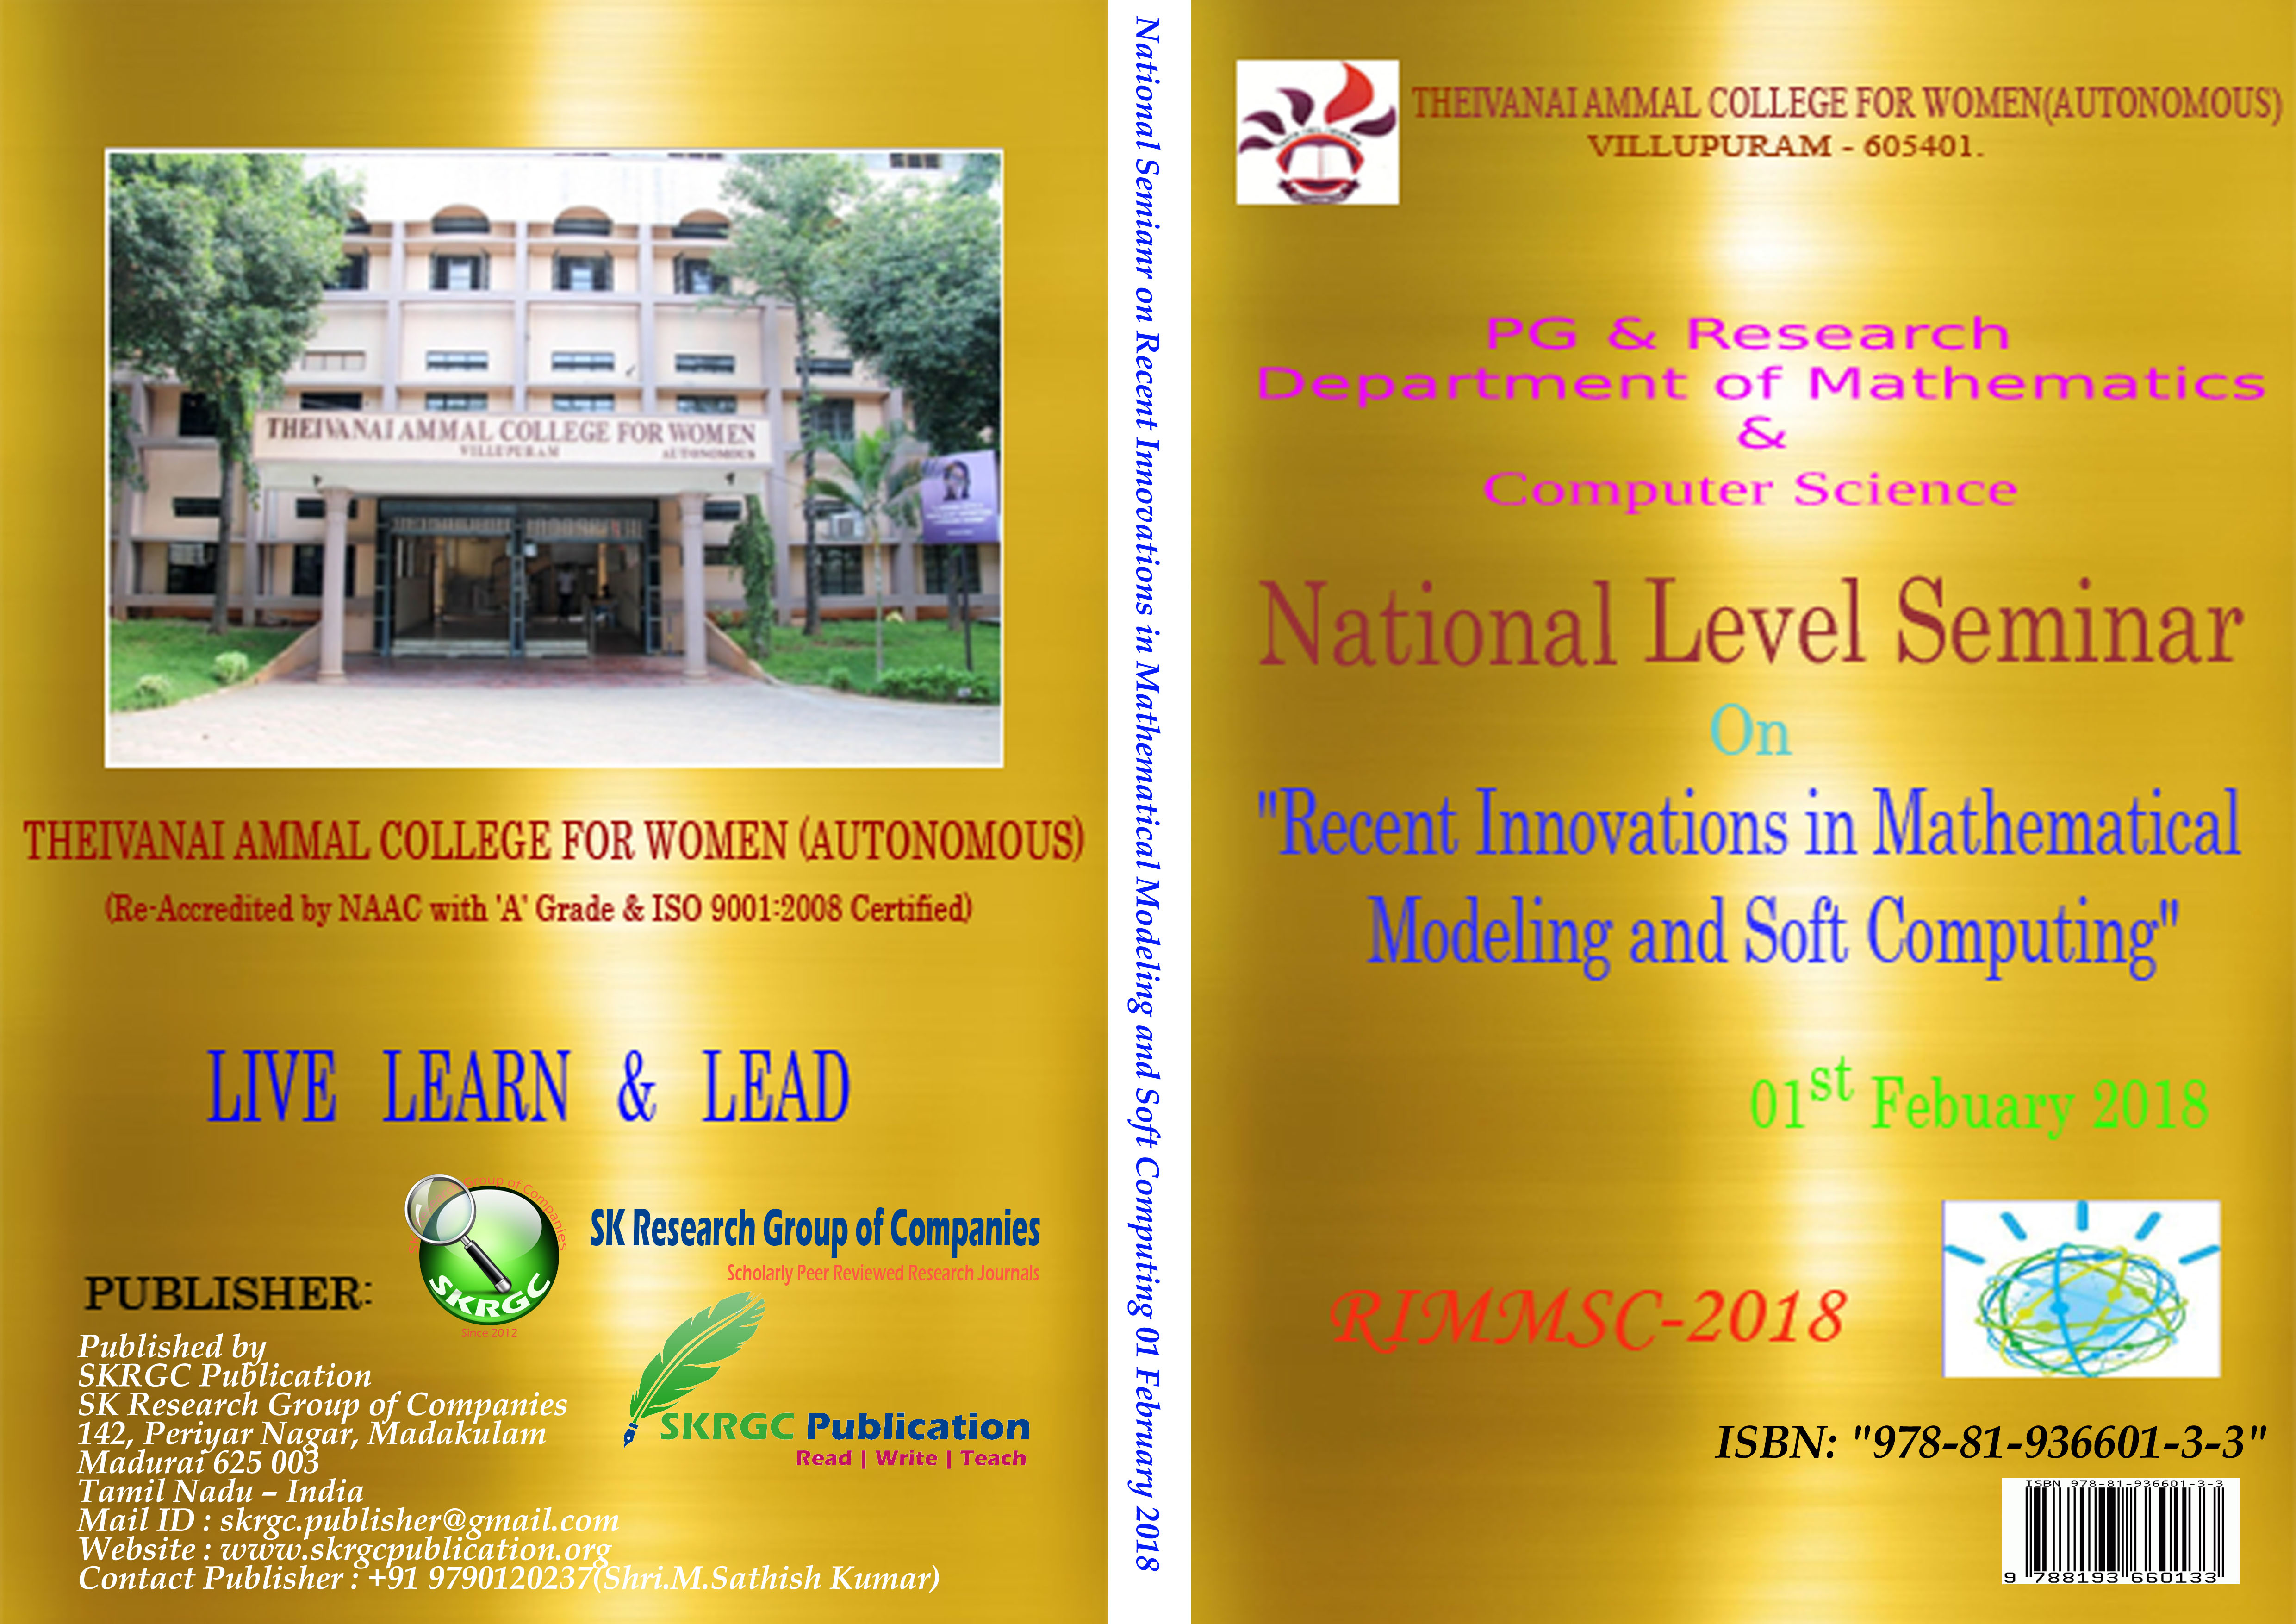 National Seminar on Recent Innovations in Mathematical Modeling and Soft Computing 01 February 2018